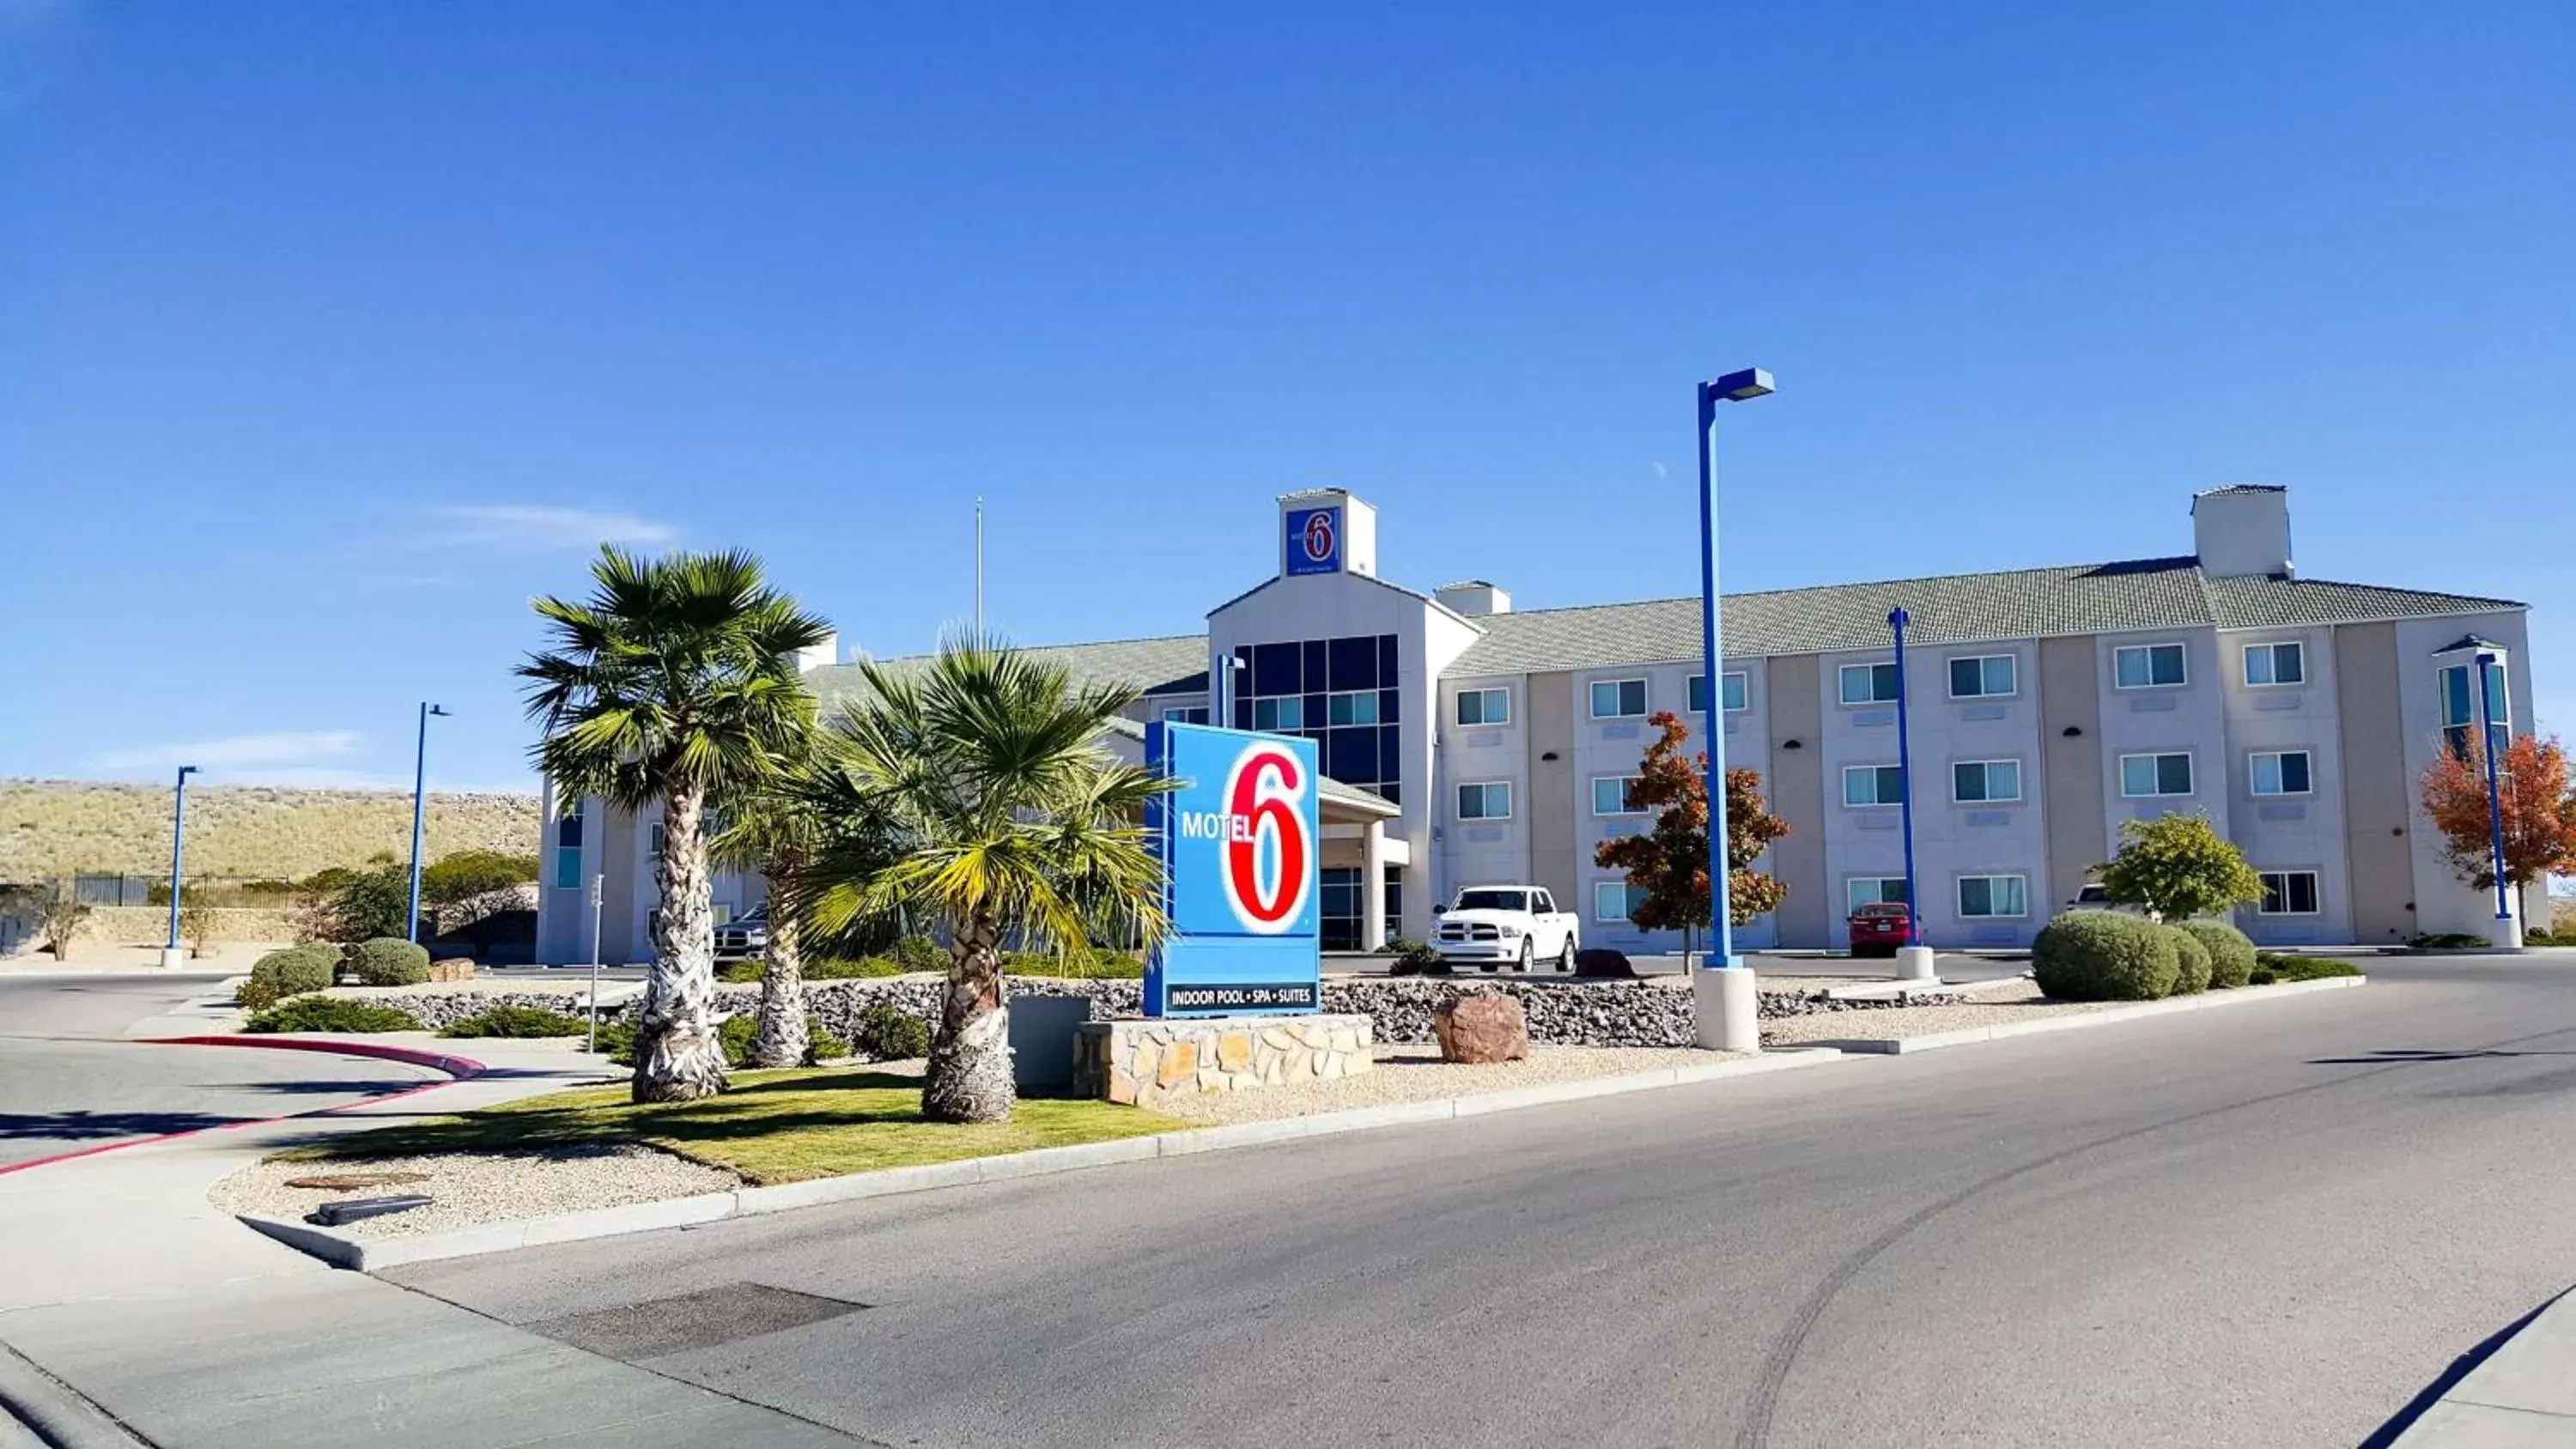 Property Building in Motel 6-Las Cruces, NM - Telshor